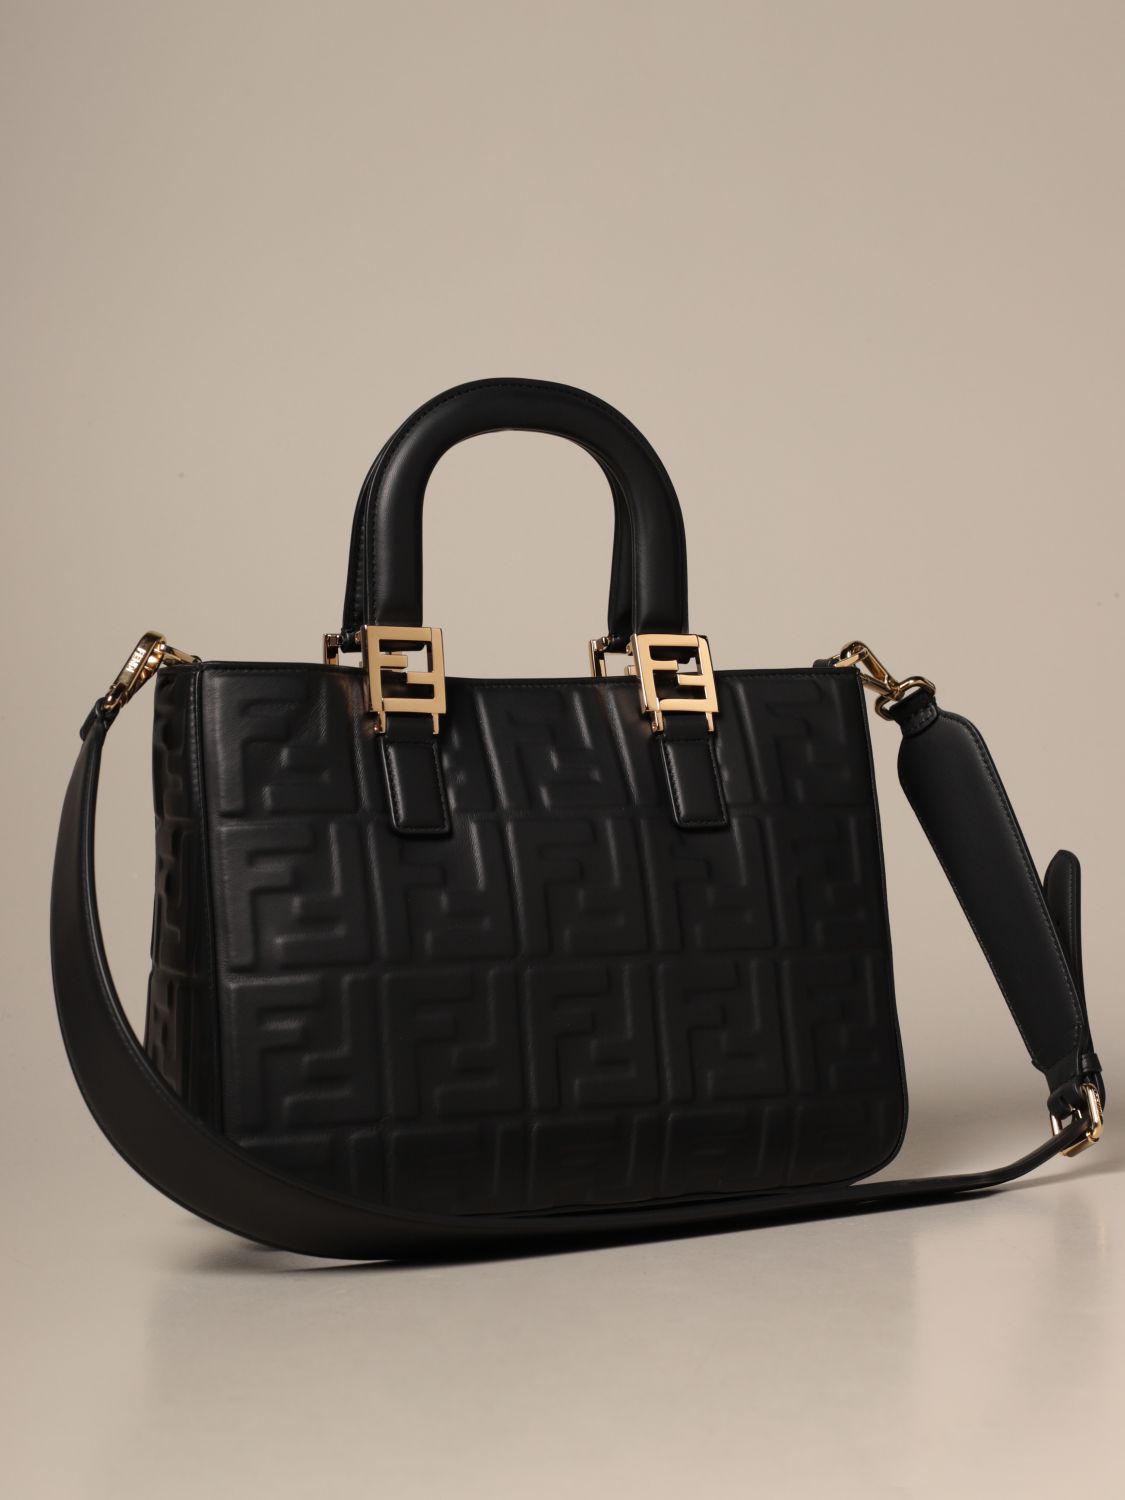 FENDI: leather bag with embossed all-over FF logo | Tote Bags Fendi